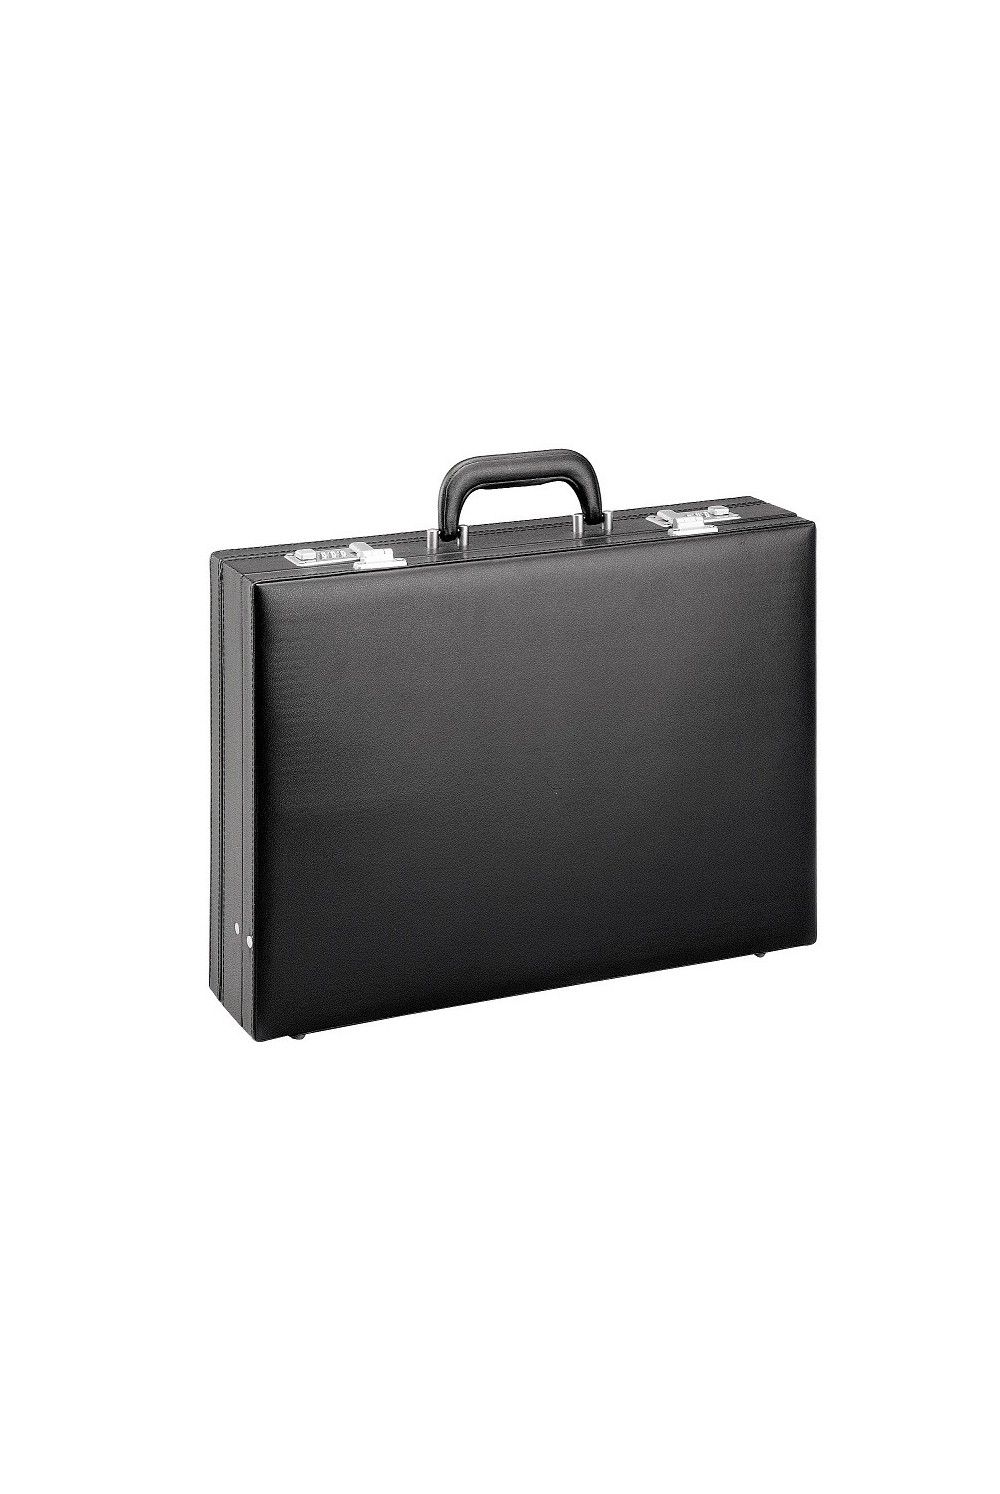 D & N briefcase finely grained PU 2625